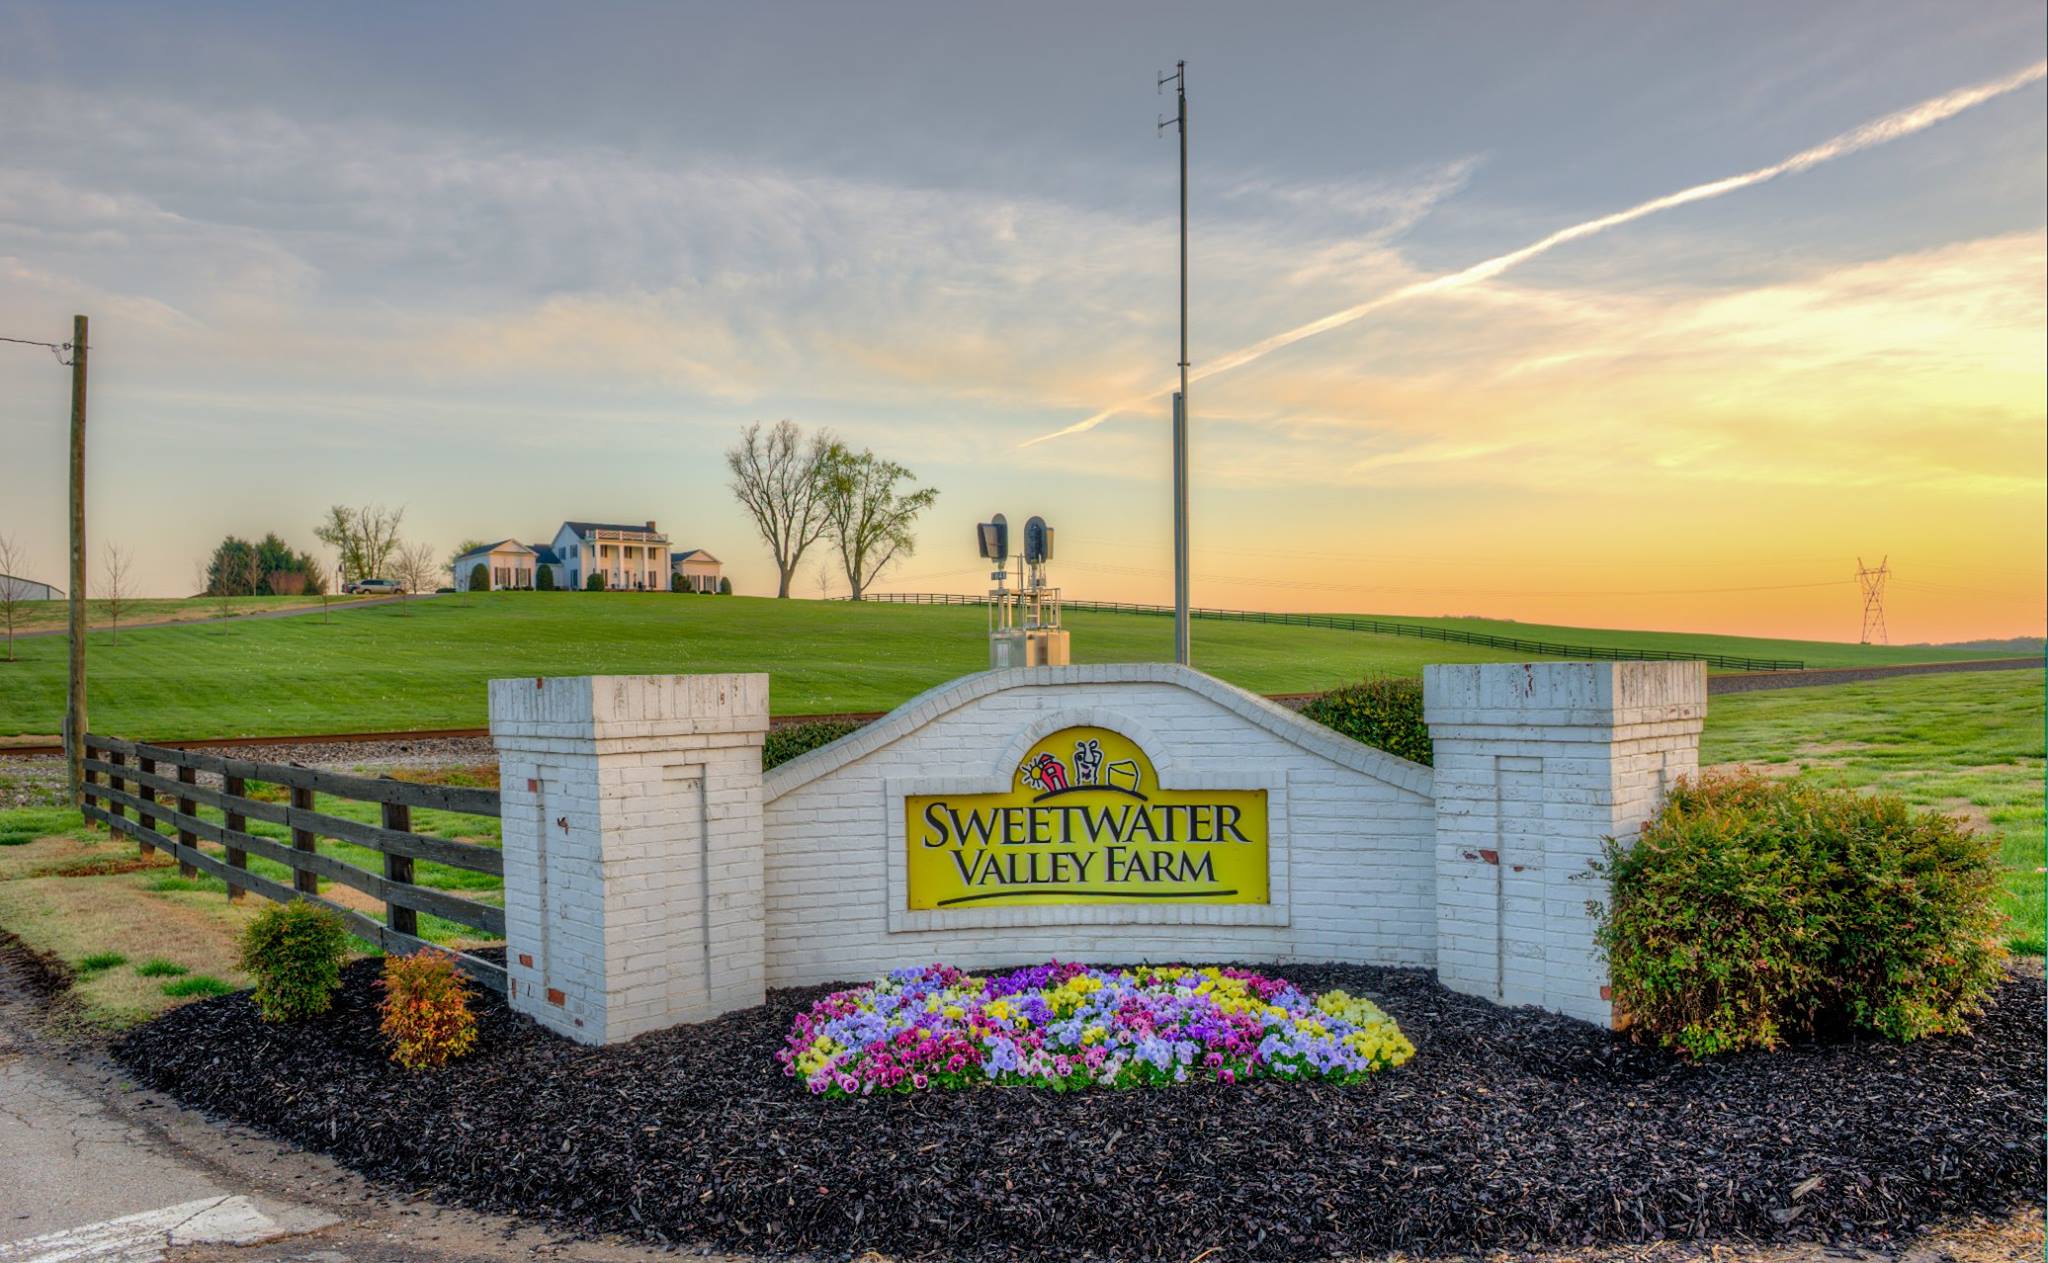 Sweetwater Valley Farm Named Innovative Dairy Farmer of the Year